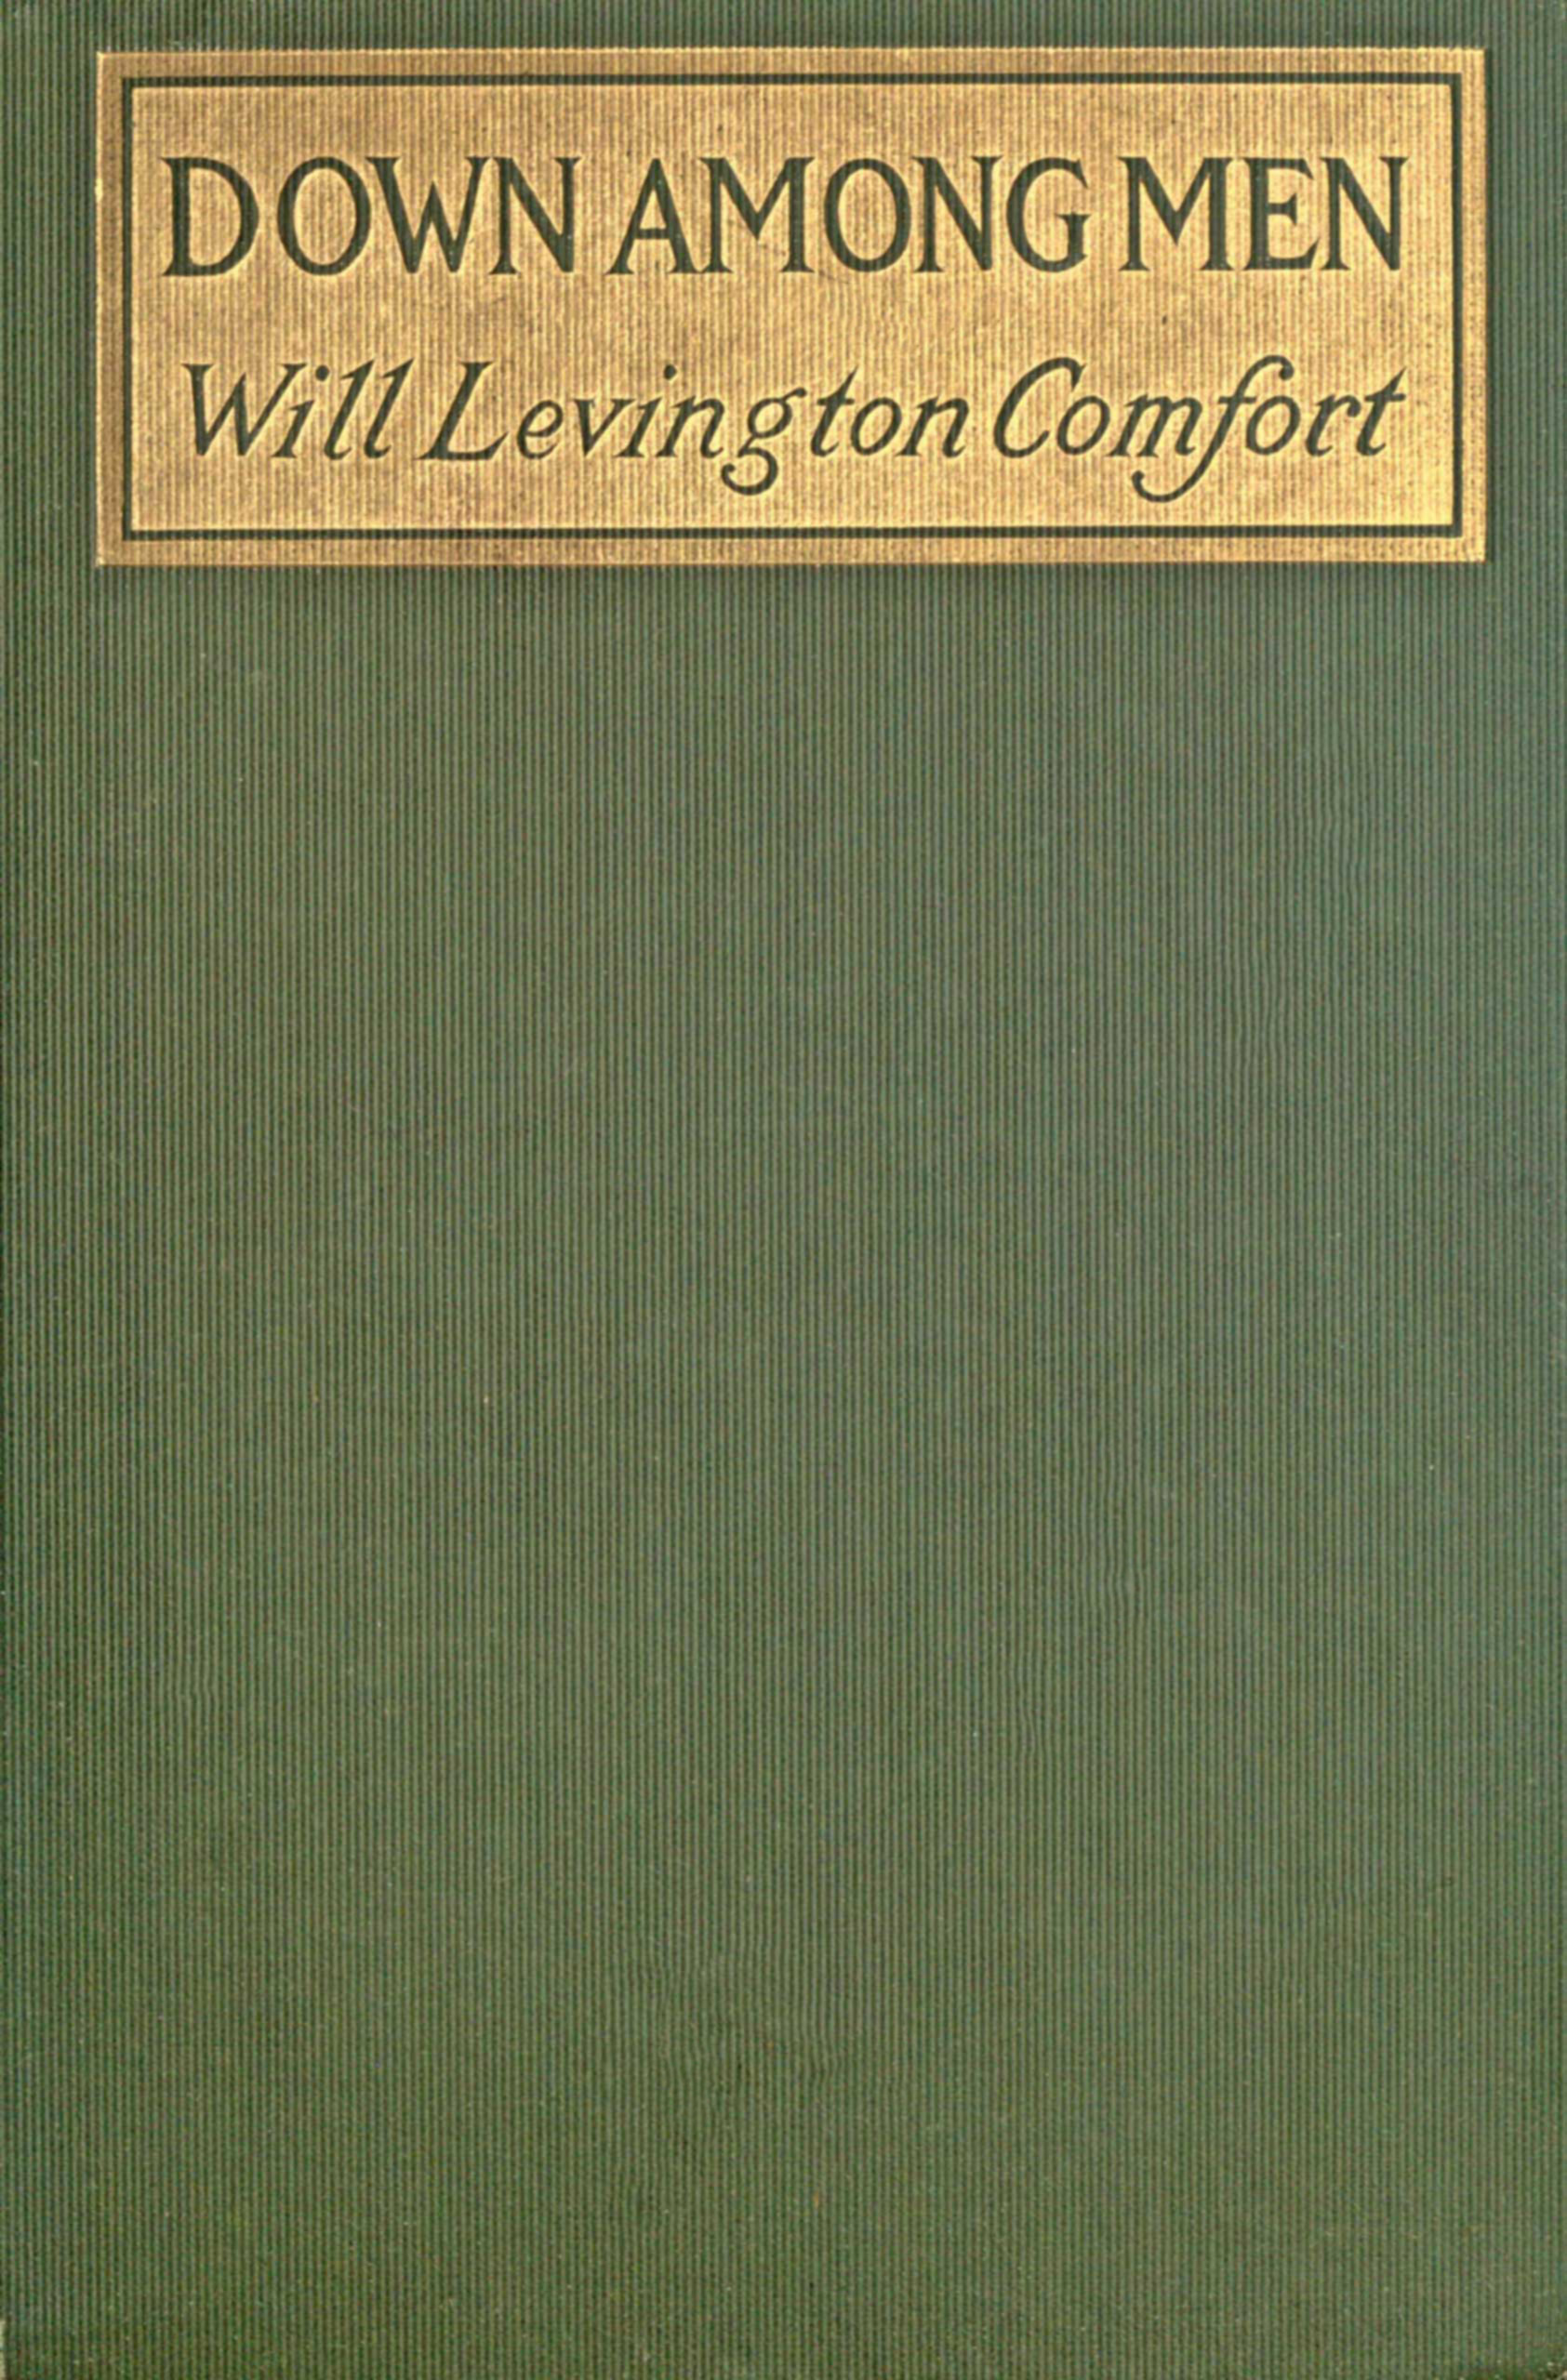 Down Among Men, by Will Levington Comfort—A Project Gutenberg eBook